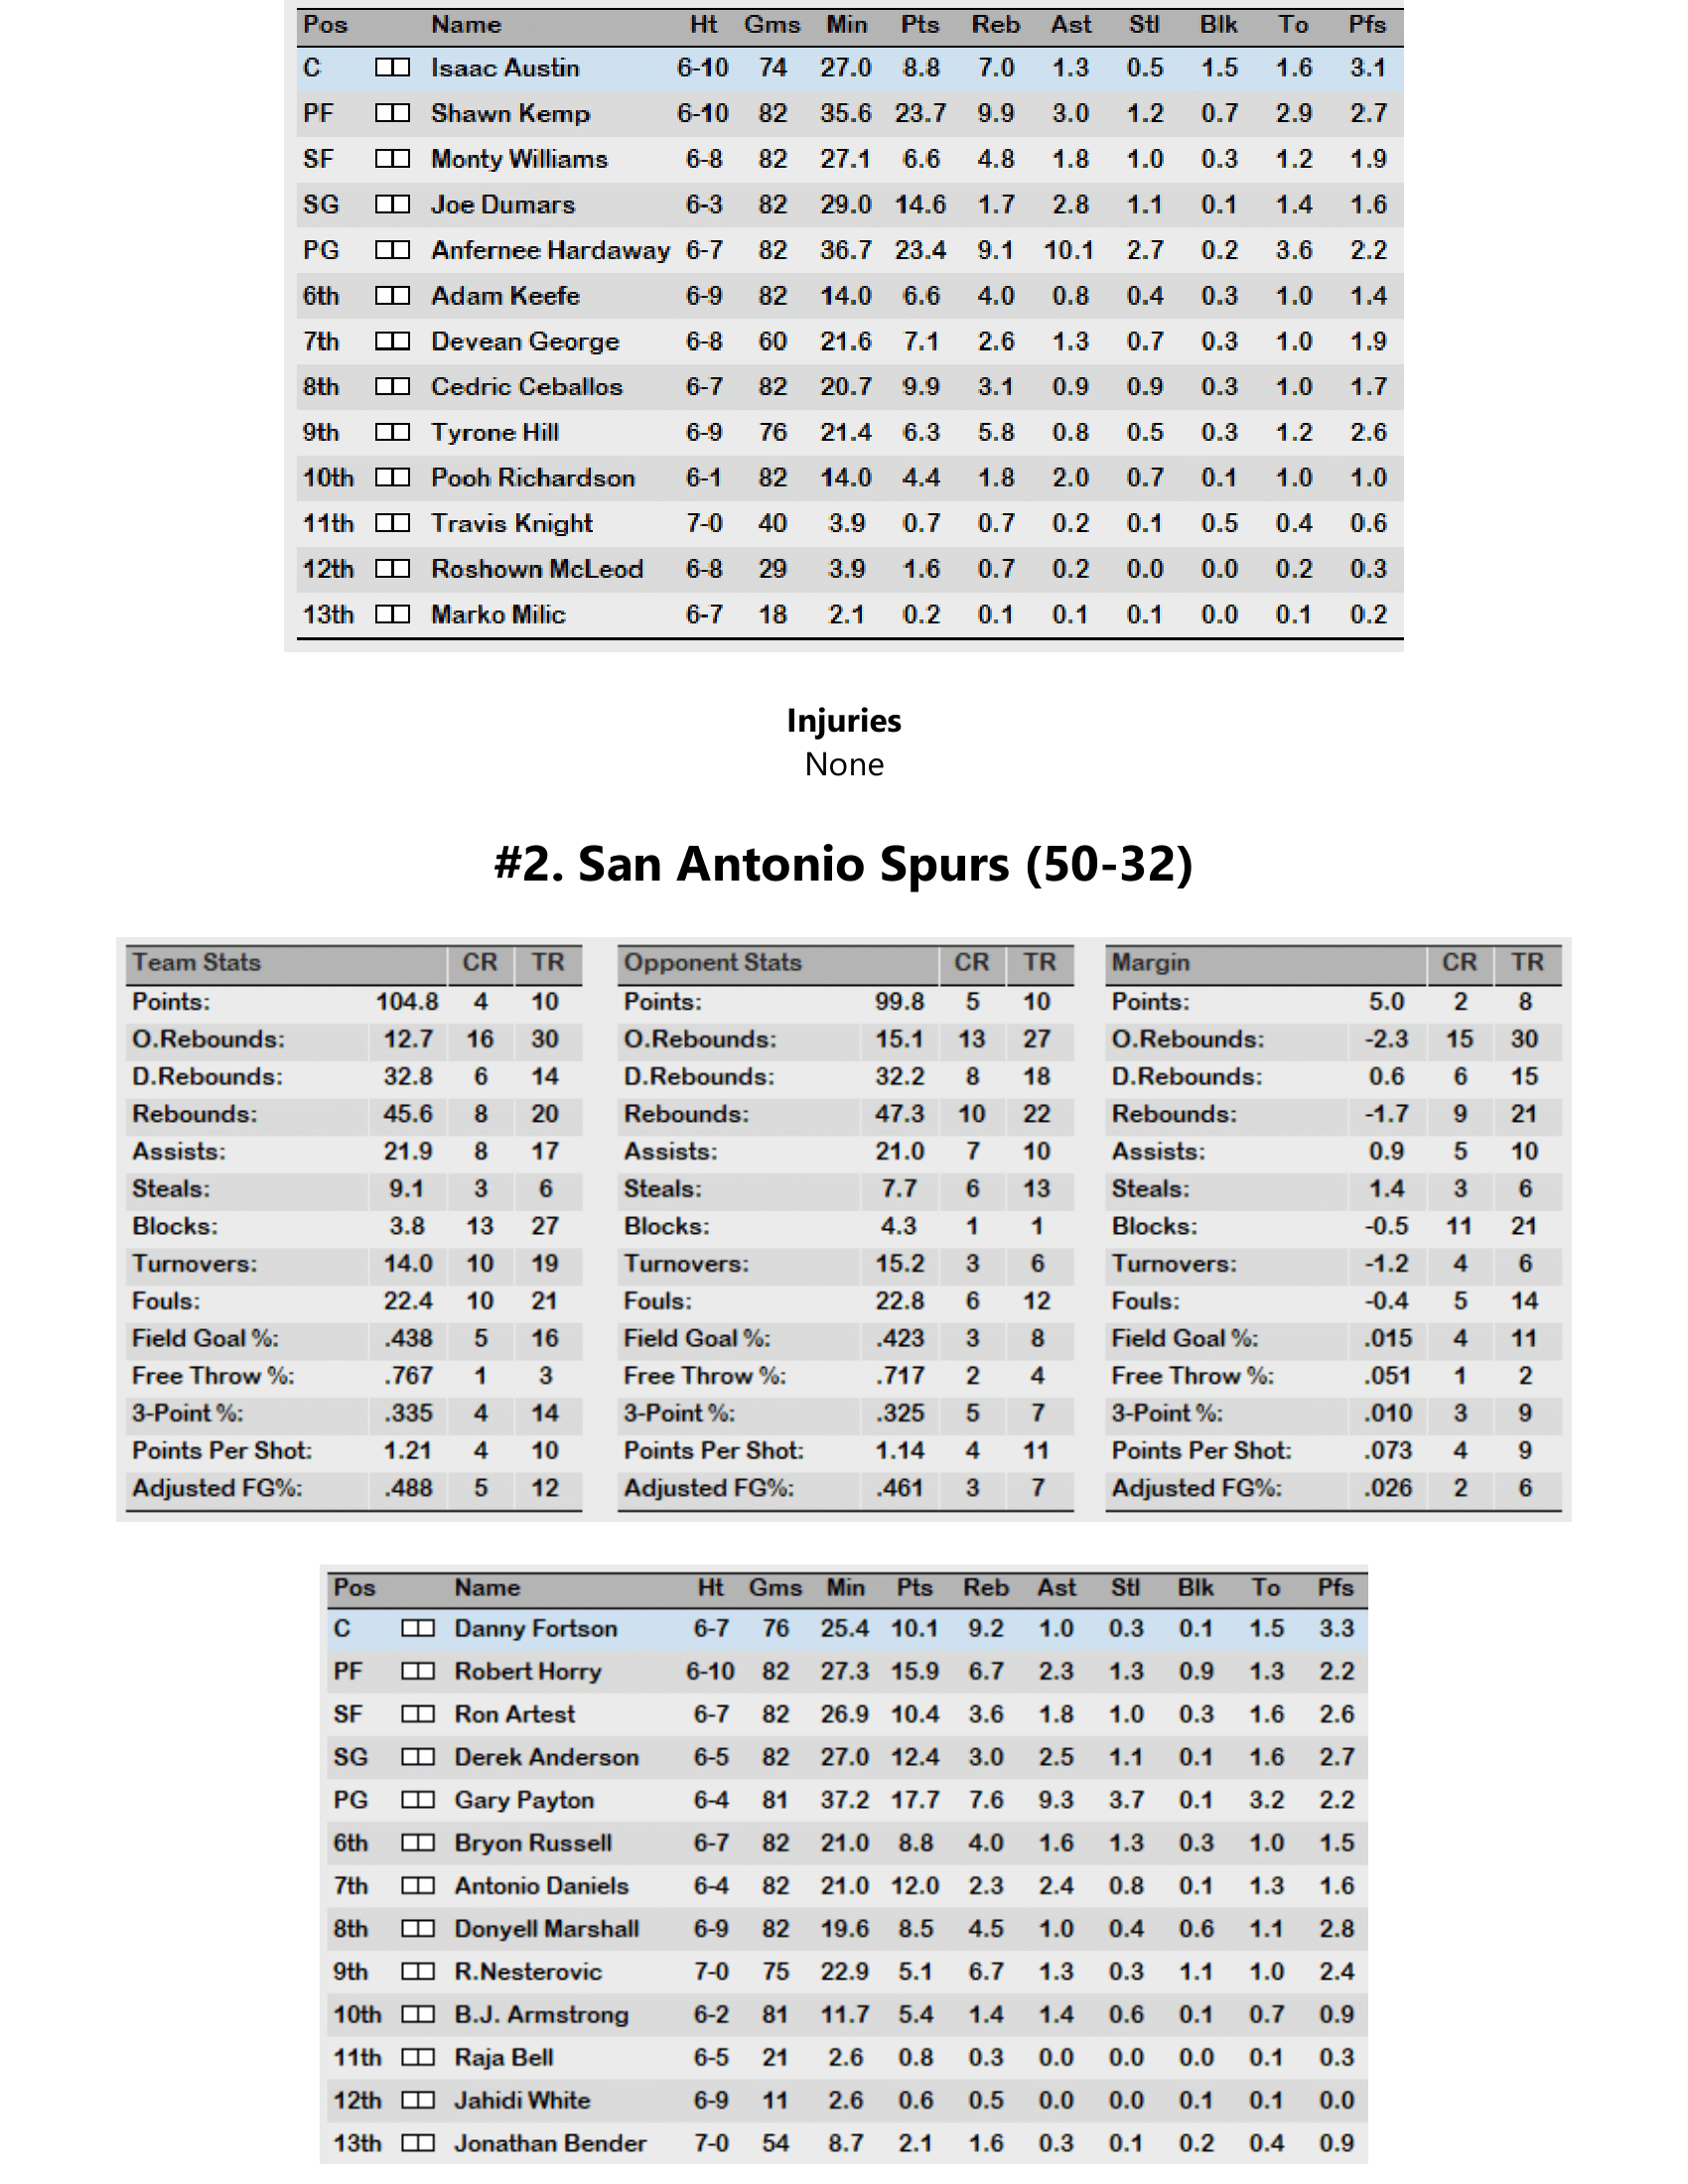 99-00-Part-3-Playoff-Preview-03.png